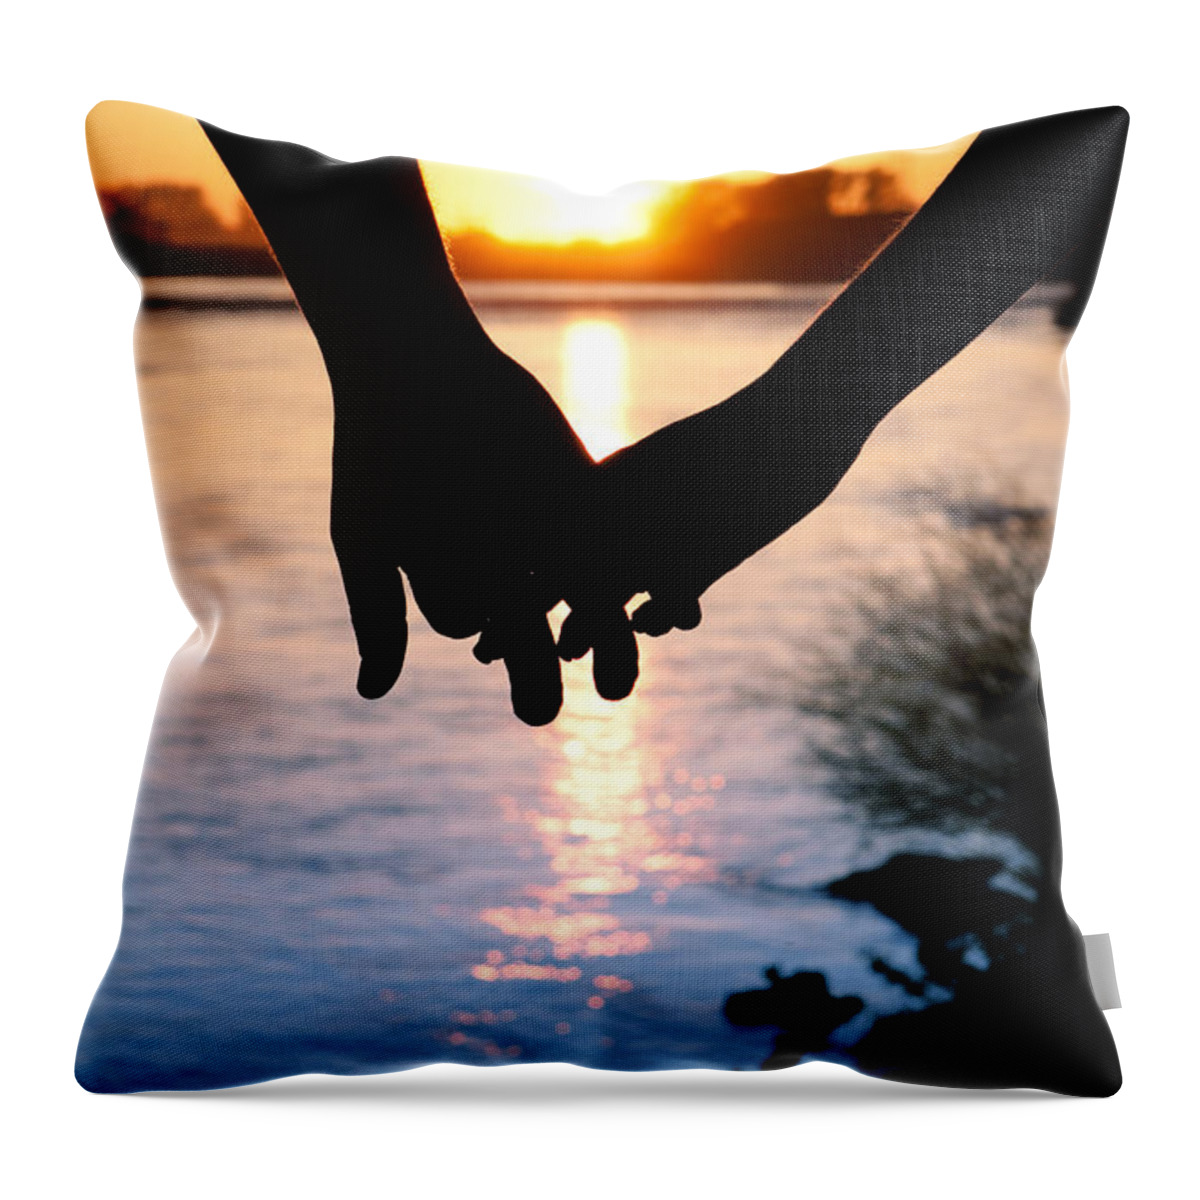 Vertical Throw Pillow featuring the photograph Holding Hands Silhouette by Cindy Singleton